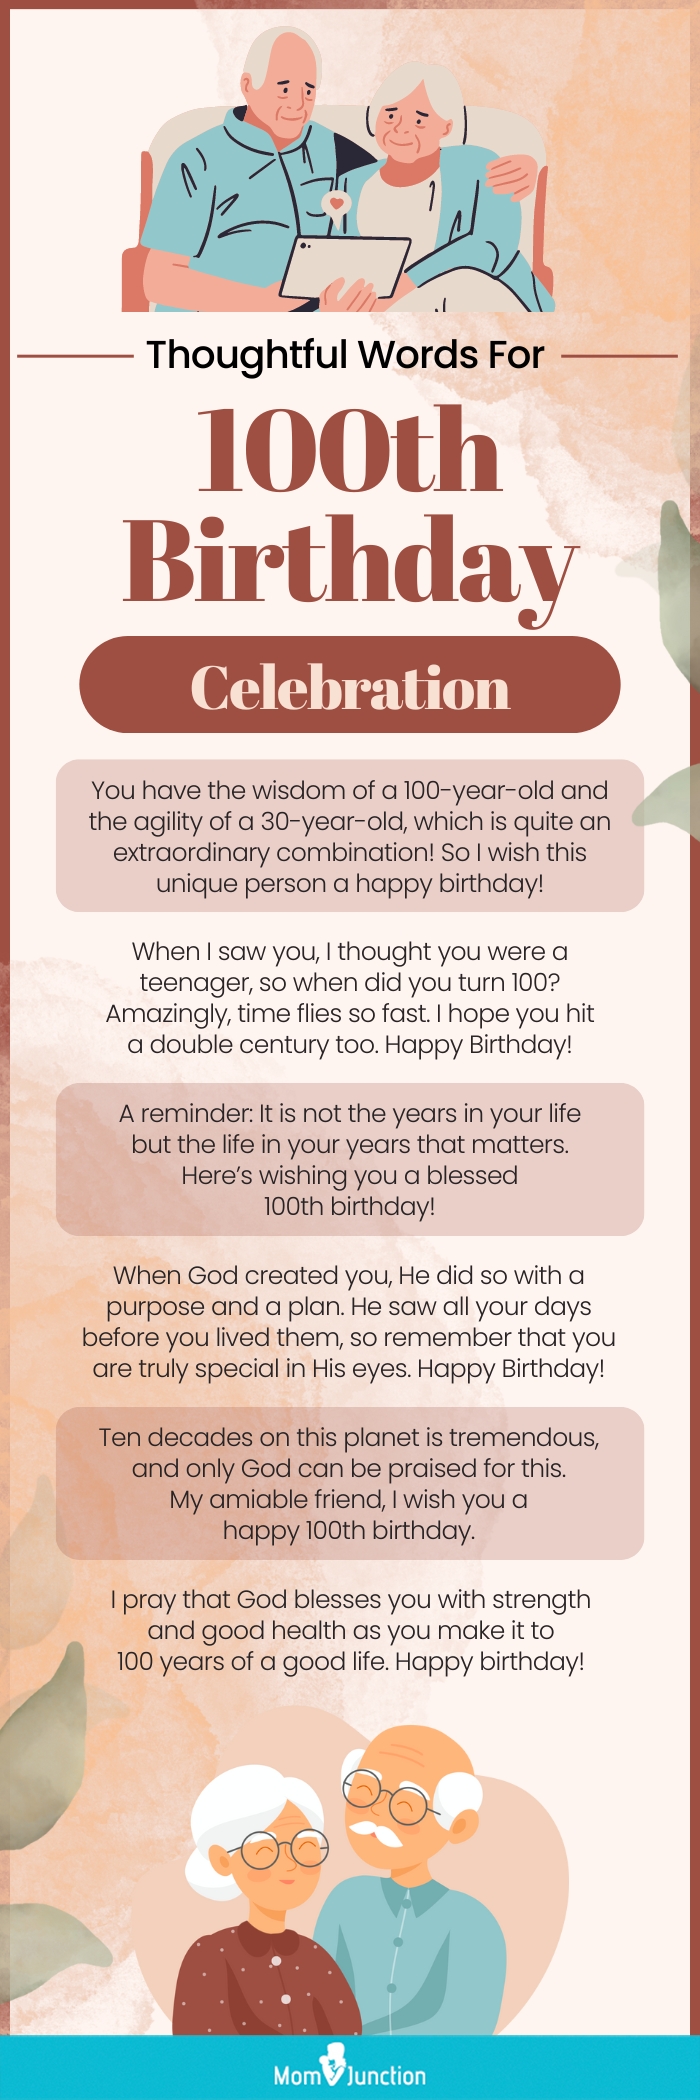 150+ Best Wedding Anniversary Wishes And Quotes For Friends